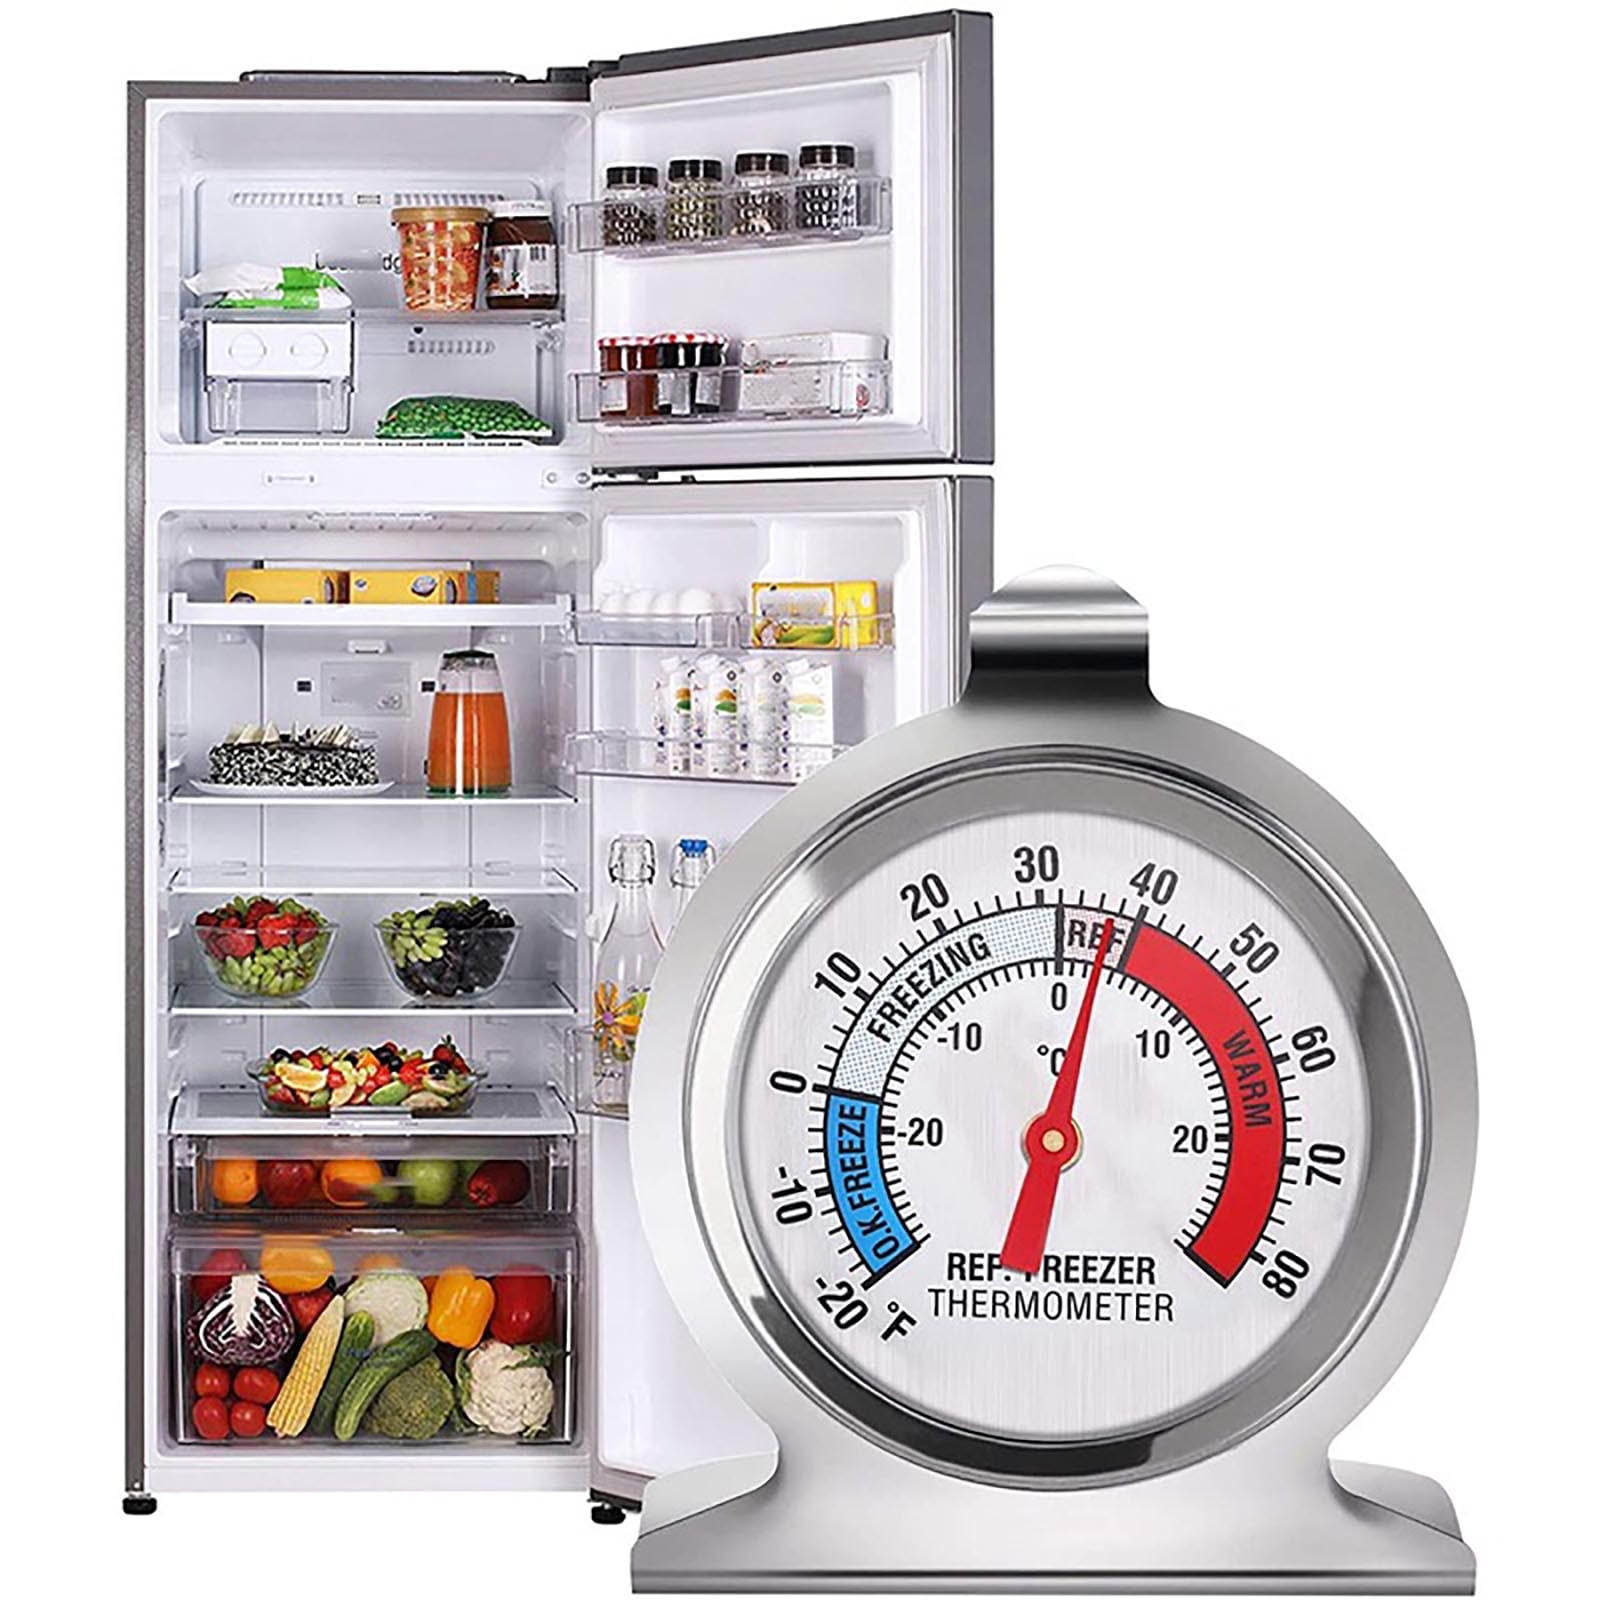 Fridge thermometer ** STOCK CLEARANCE ** Small 52mm Dial 